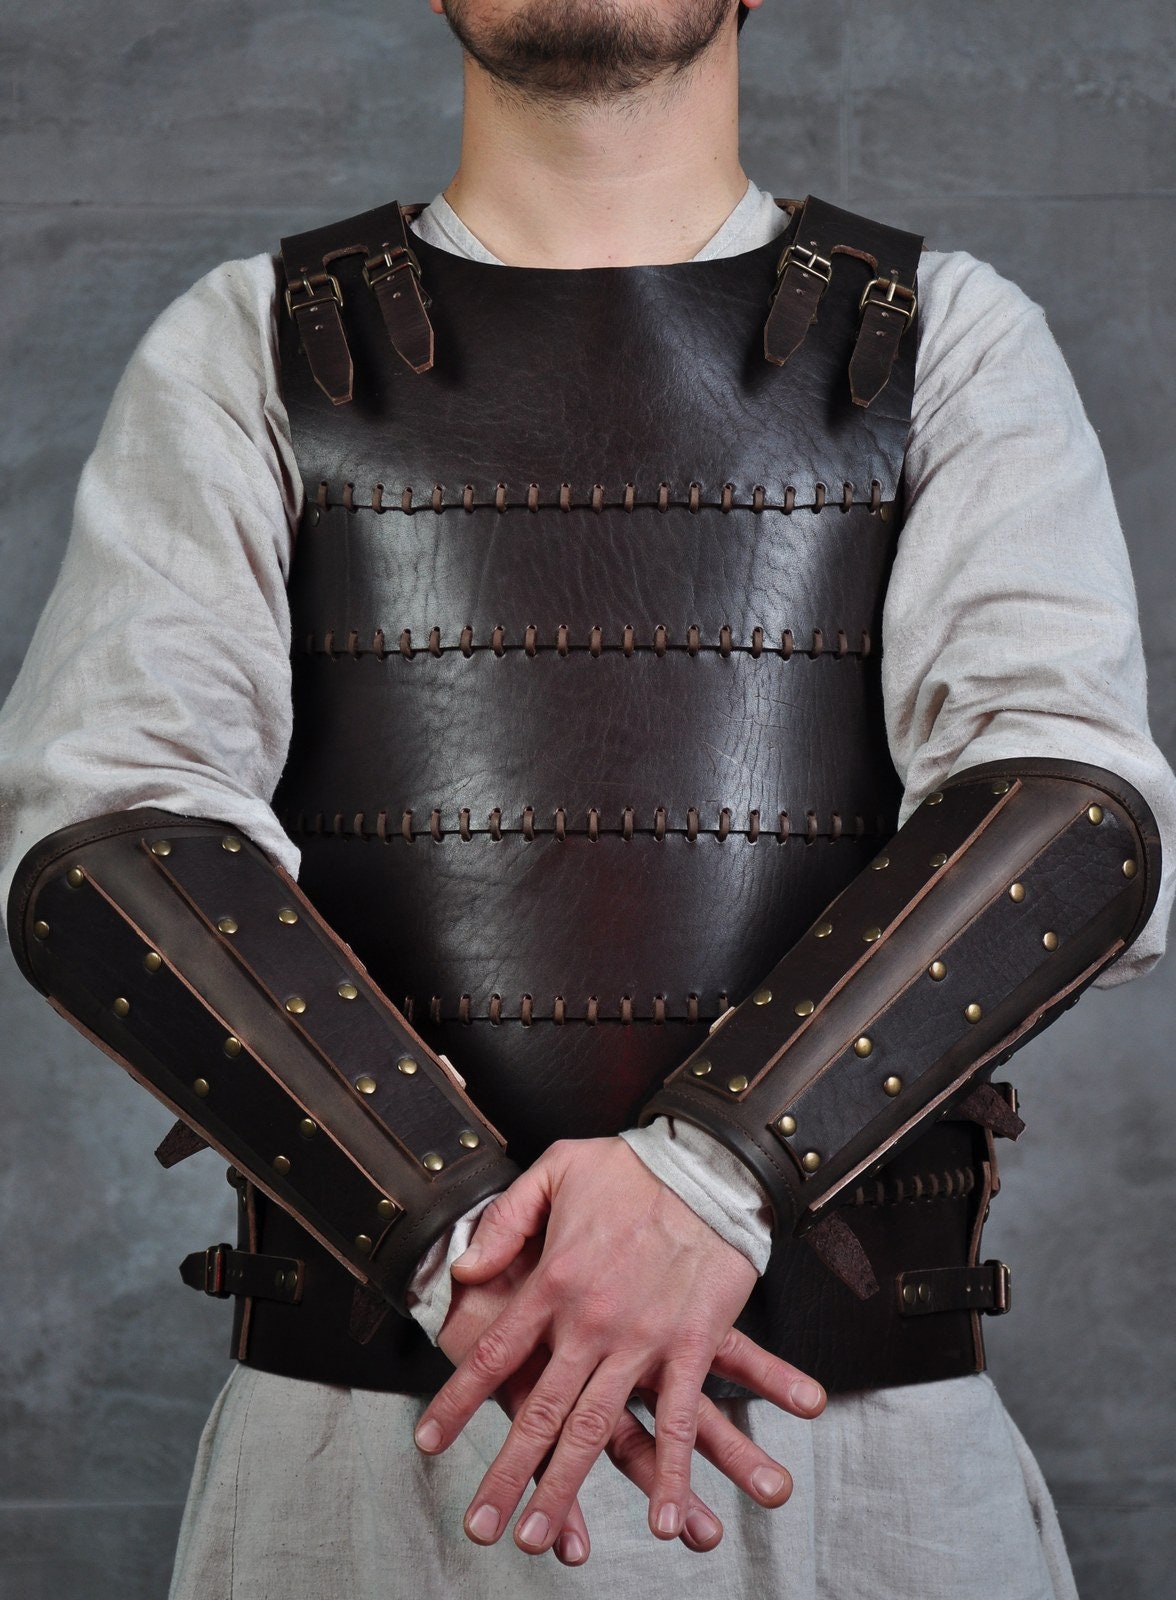 Metal Armour Enclosed Arm Protectors Perfect for Stage and Costume or LARP. 